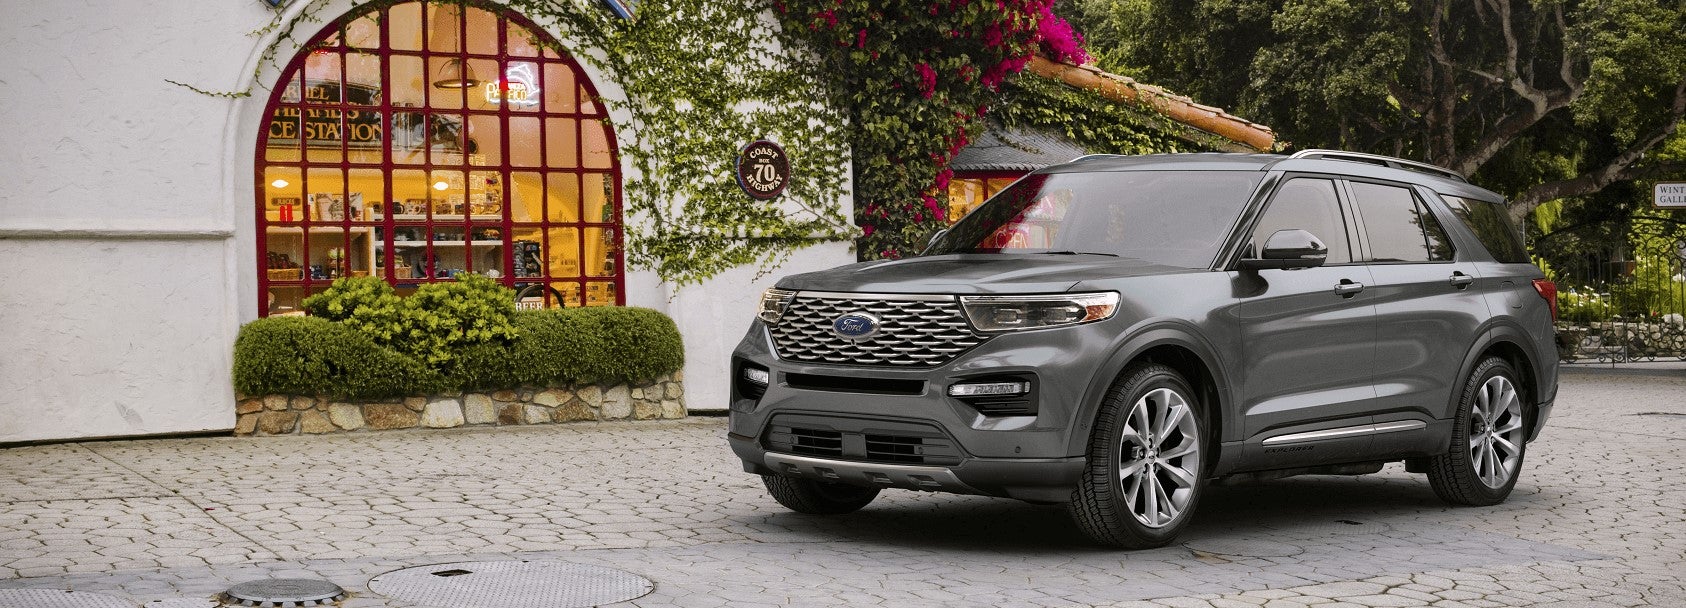 2021 Ford Explorer Review Waldorf MD